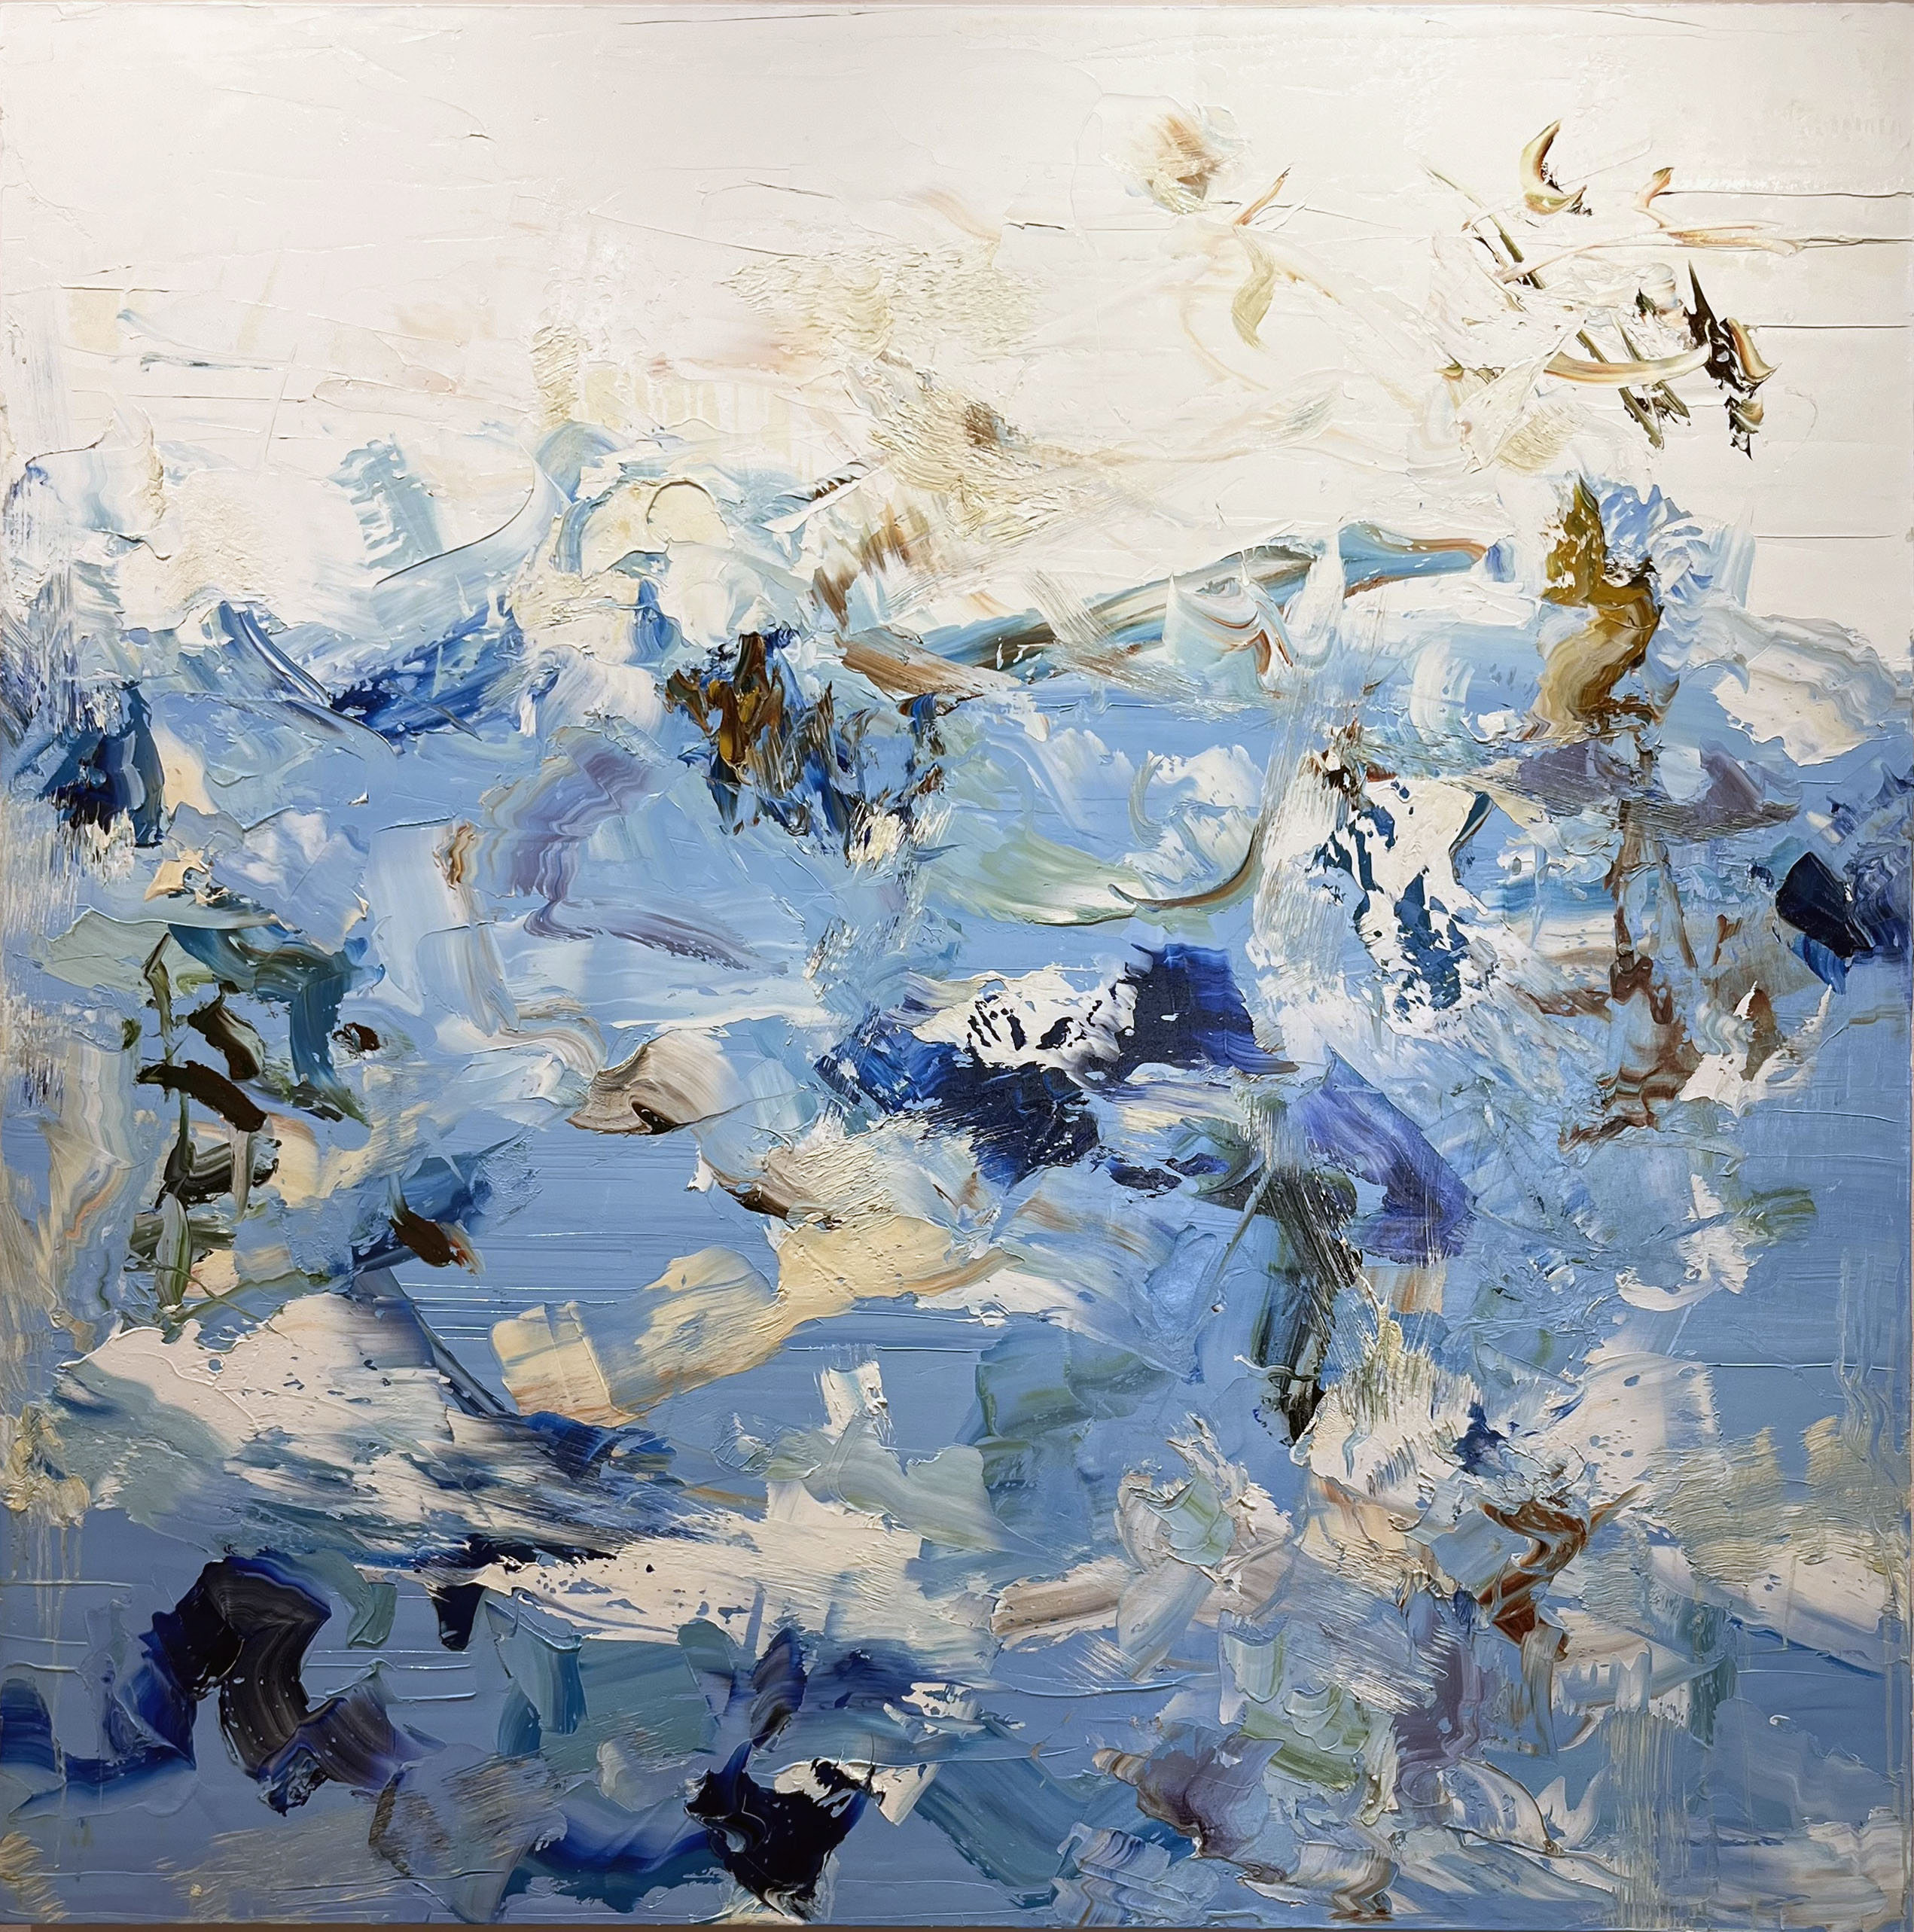 BLUE LIFT 1, oil on canvas, 55 x 55 inches